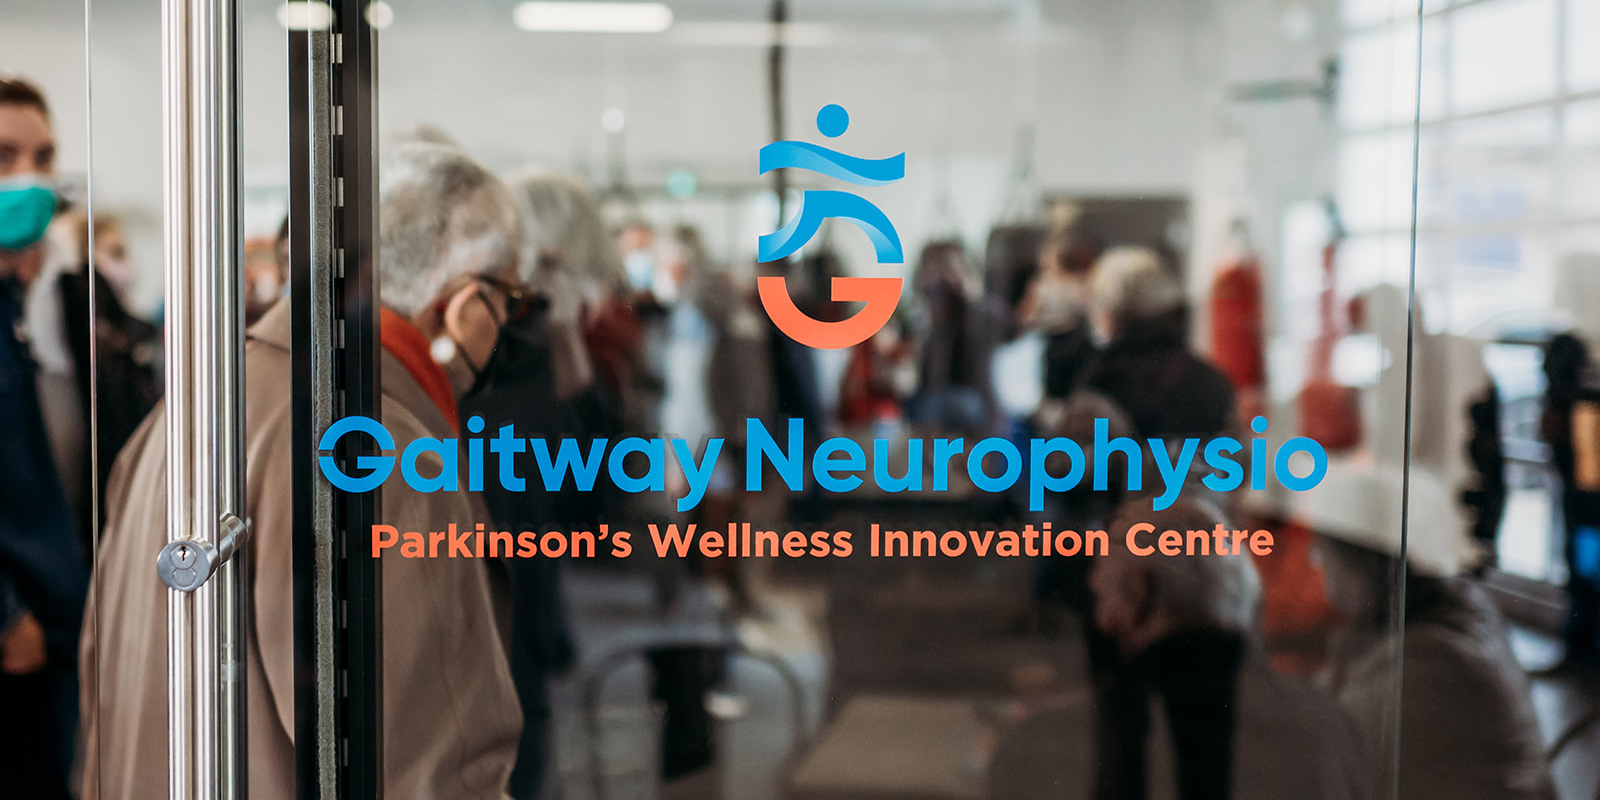 Gaitway Neurophysio provides 1 on 1 or small group rehabilitation services.